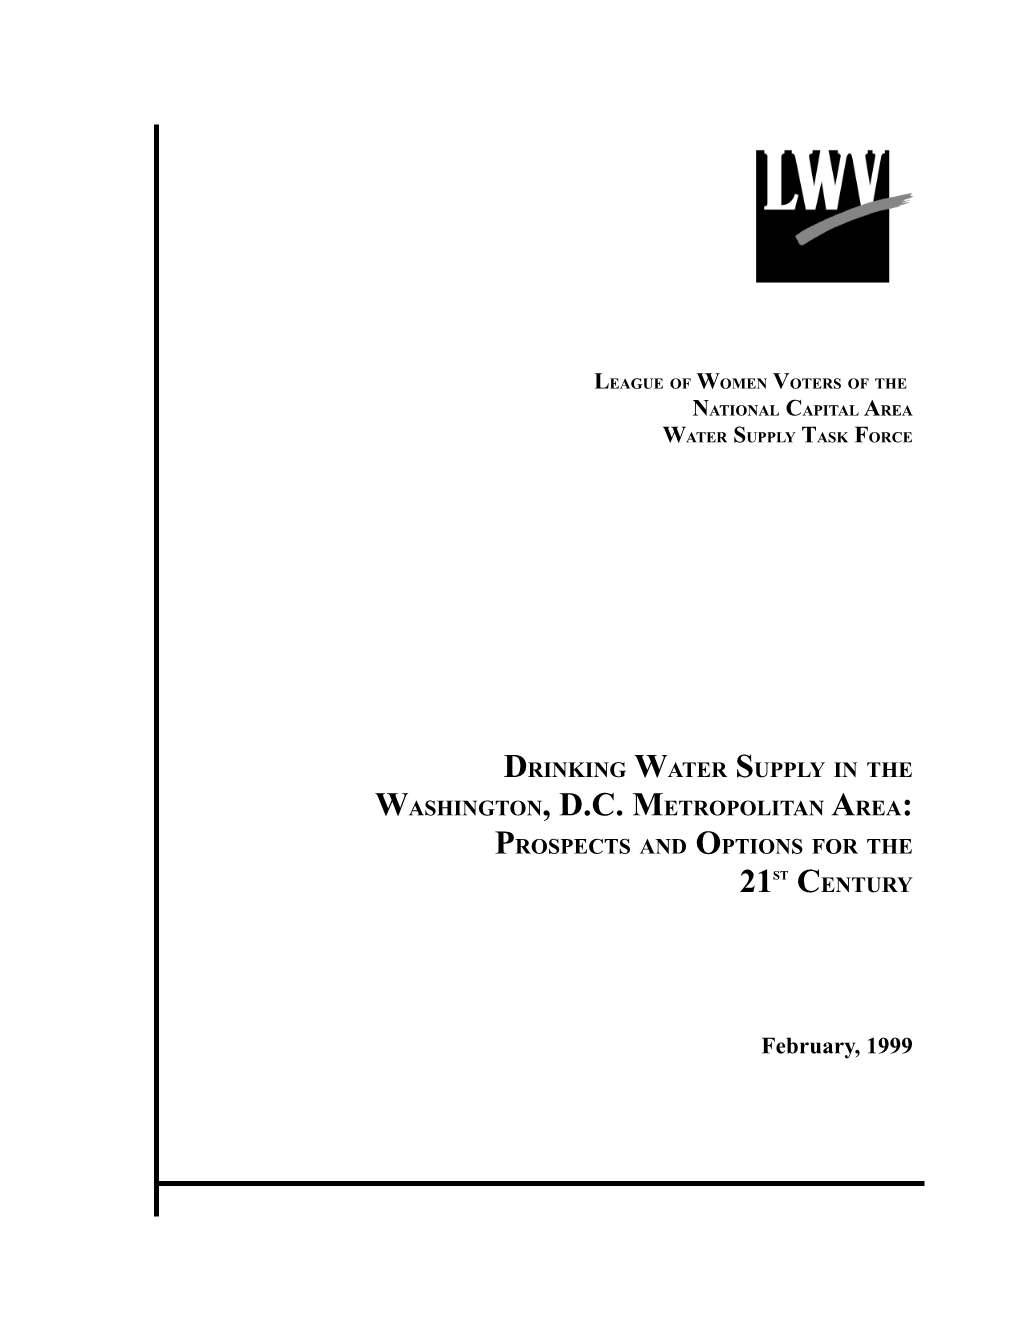 Drinking Water Supply in the Washington, D.C. Metropolitan Area: Prospects and Options for the 21St Century